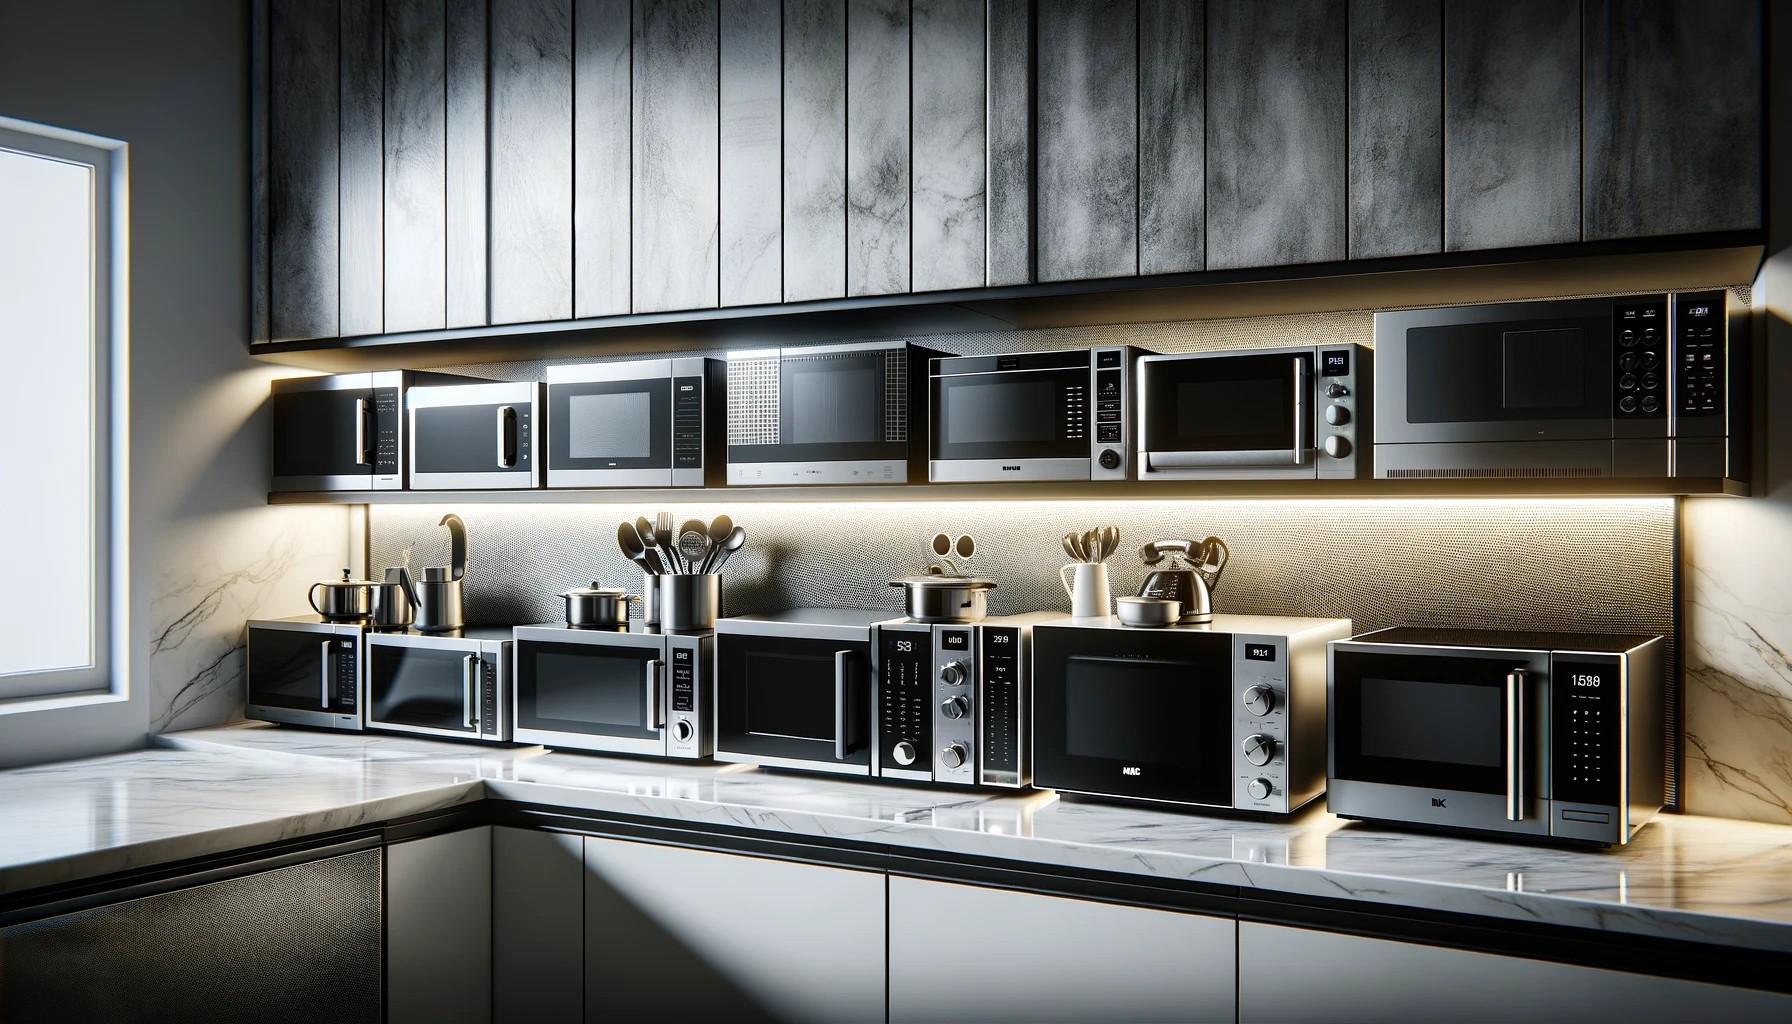 Microwave ovens lined up in the kitchen